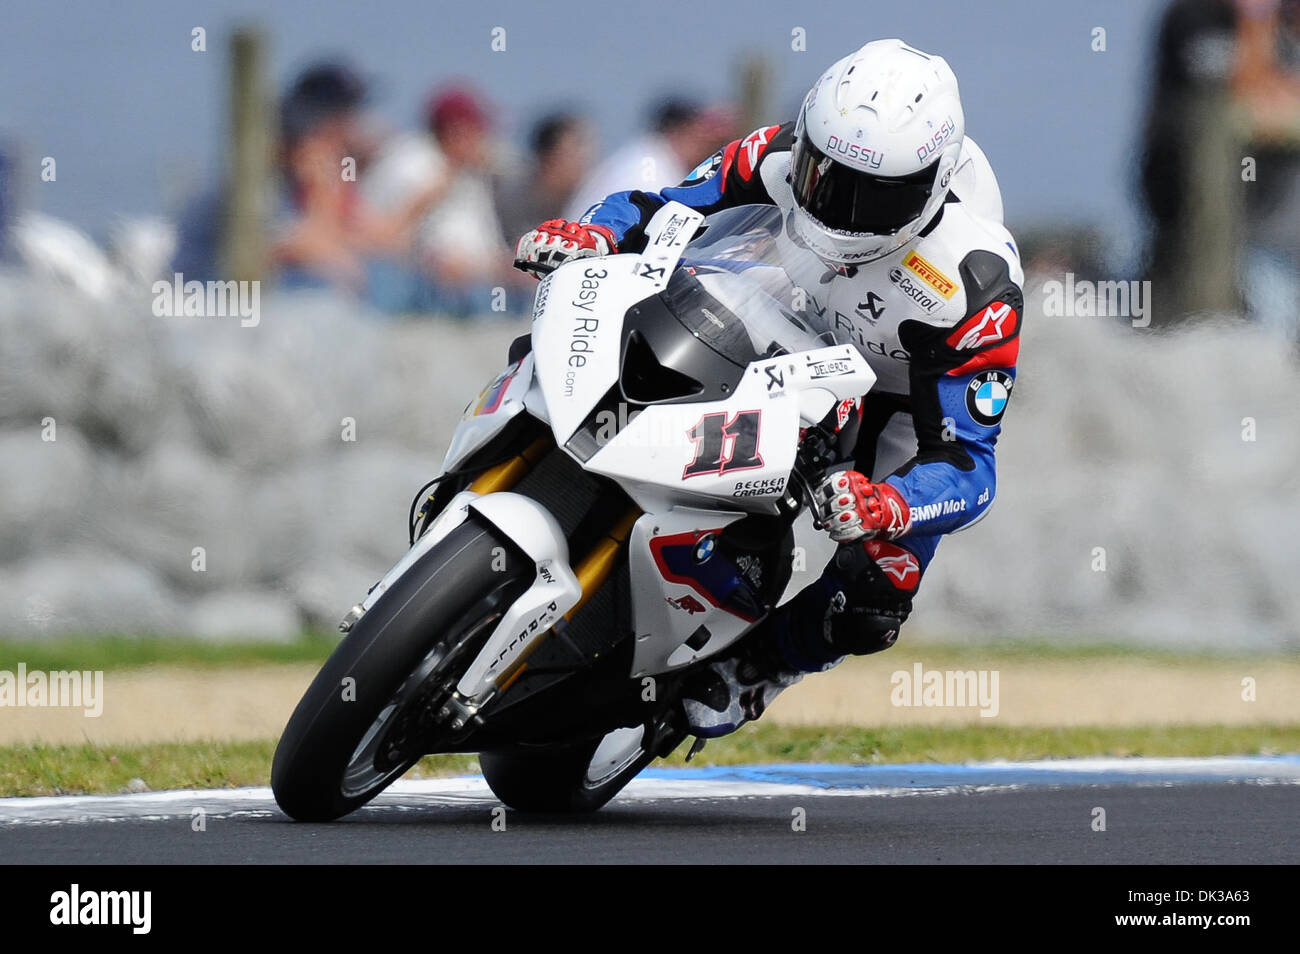 Feb. 26, 2011 - Phillip Island, Victoria, Australia - Troy Corser (AUS) riding the BMW S1000 RR (11) of the BMW Motorrad Motorsport Team during Superpole qualifying for round one of the 2011 FIM Superbike World Championship at Phillip Island, Australia. (Credit Image: © Sydney Low/Southcreek Global/ZUMAPRESS.com) Stock Photo